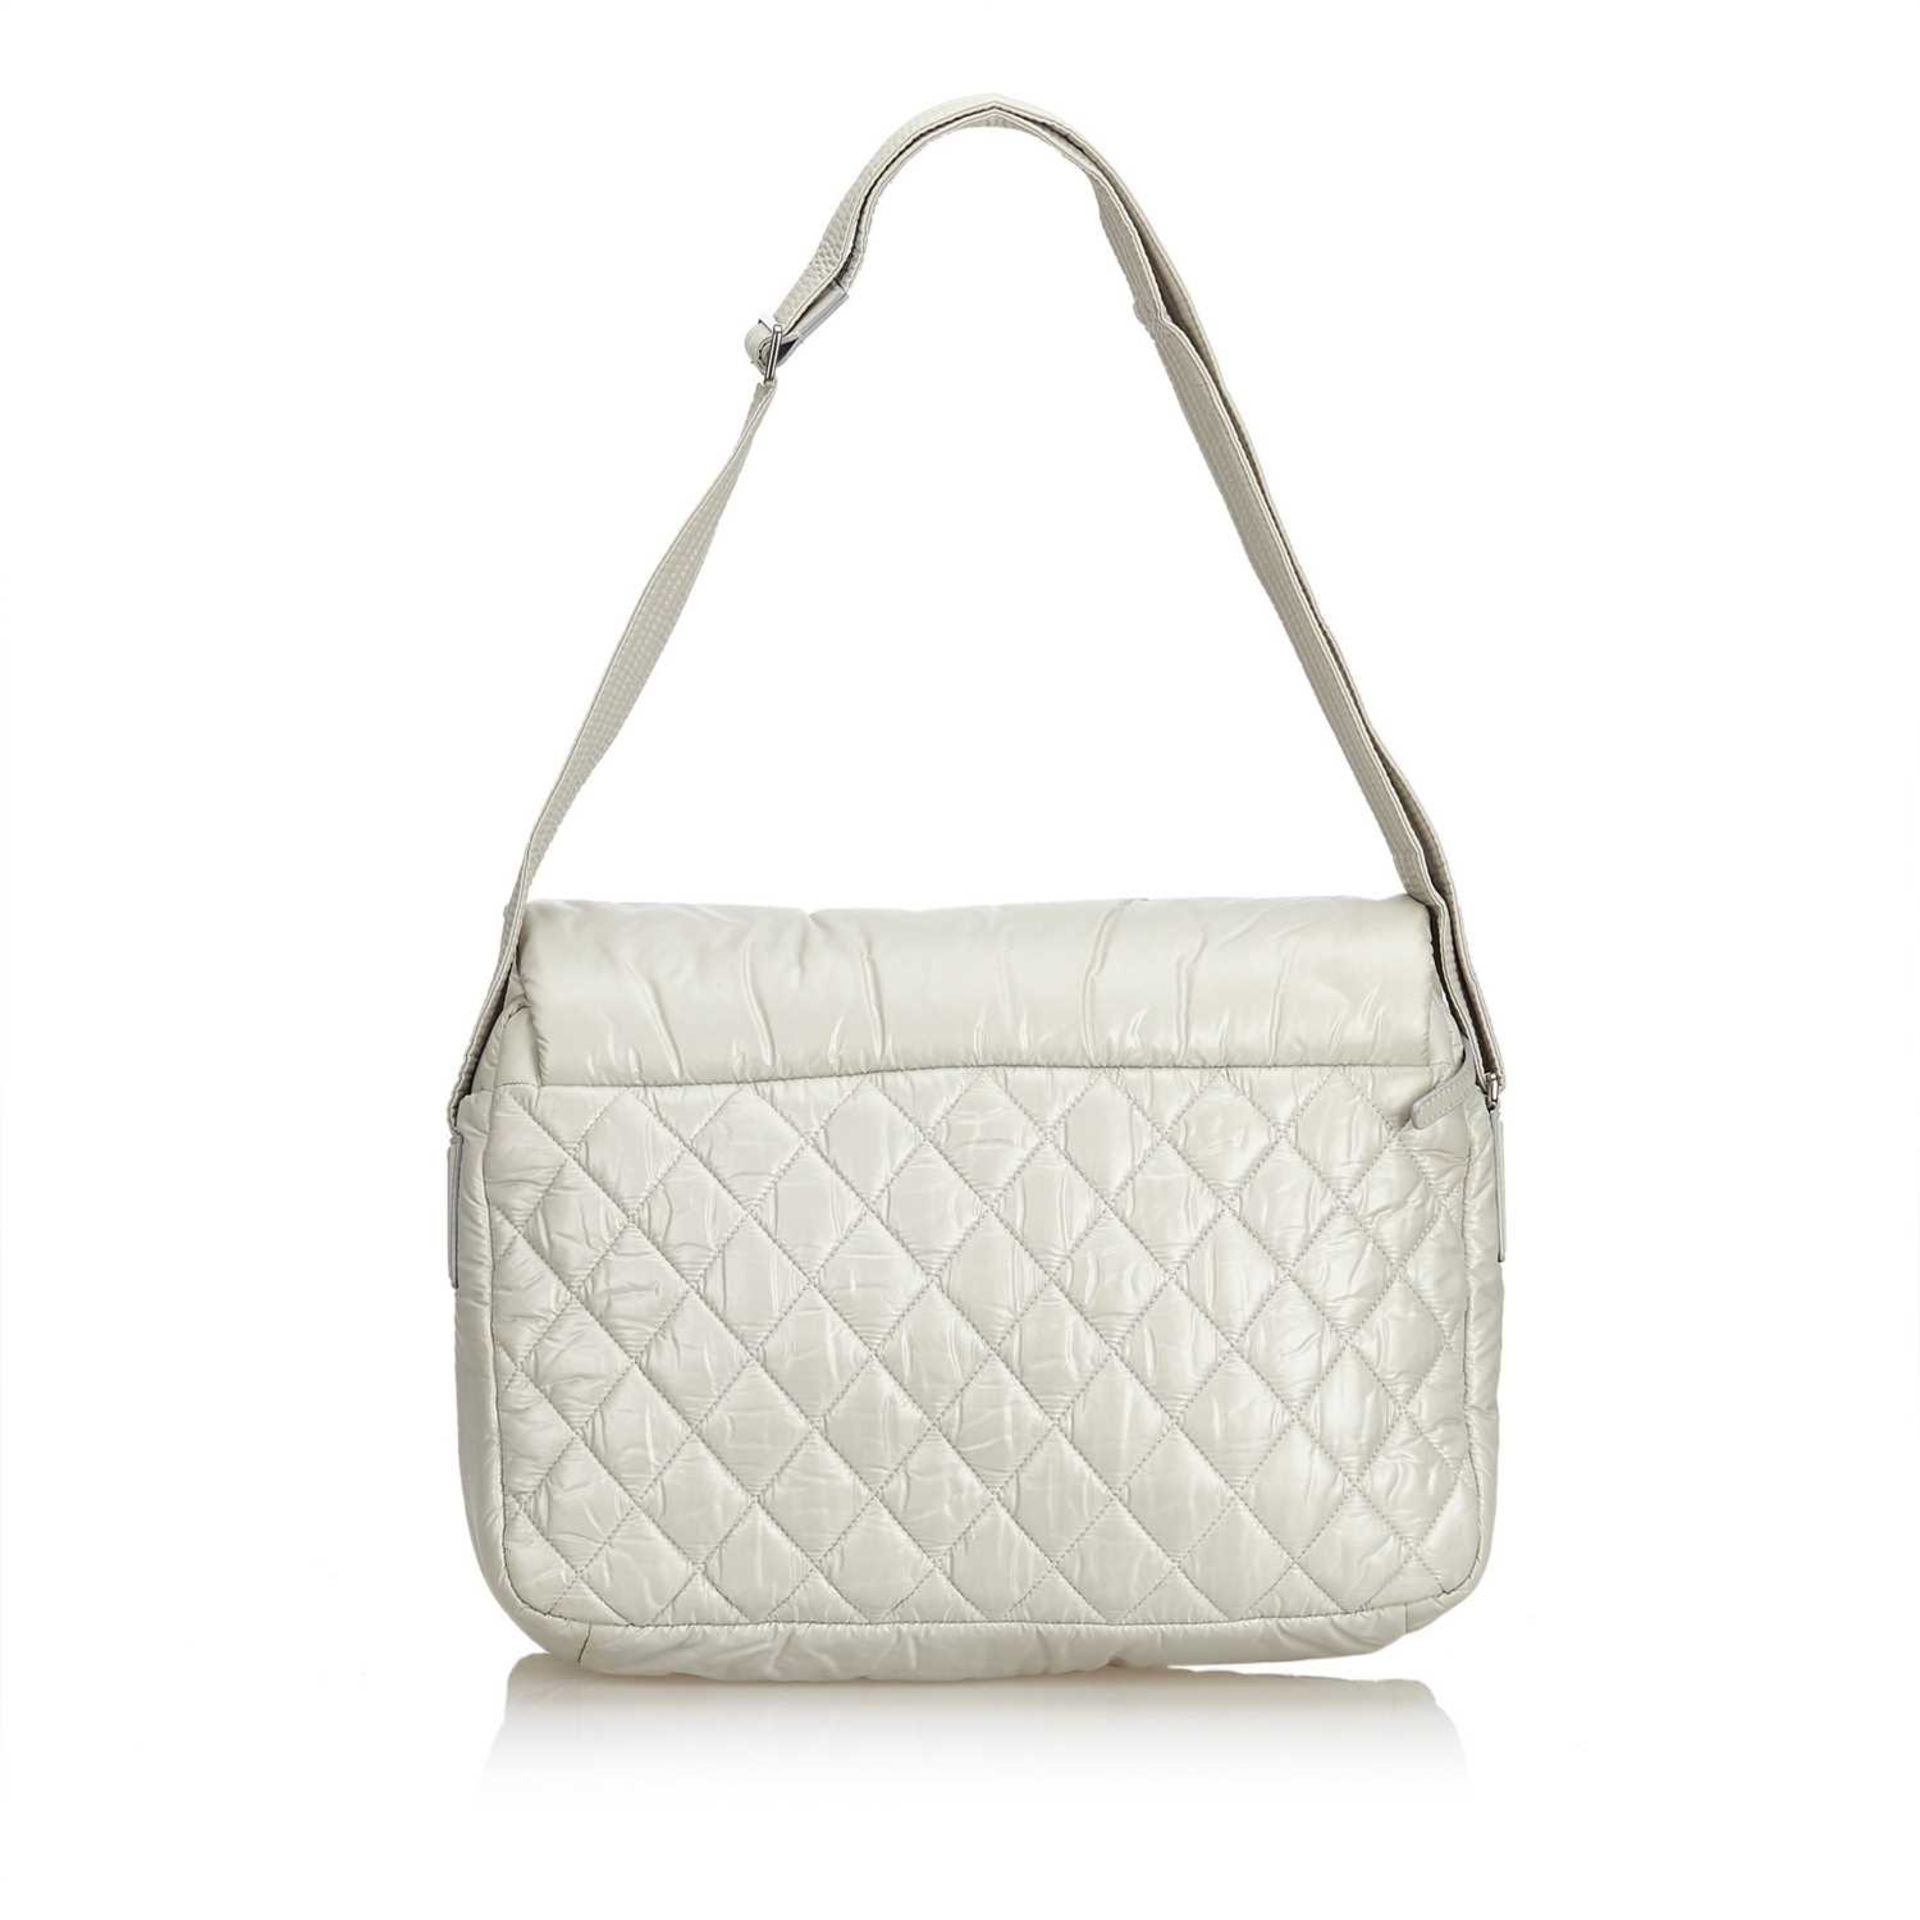 A Chanel Cocoon messenger bag, - Image 6 of 13